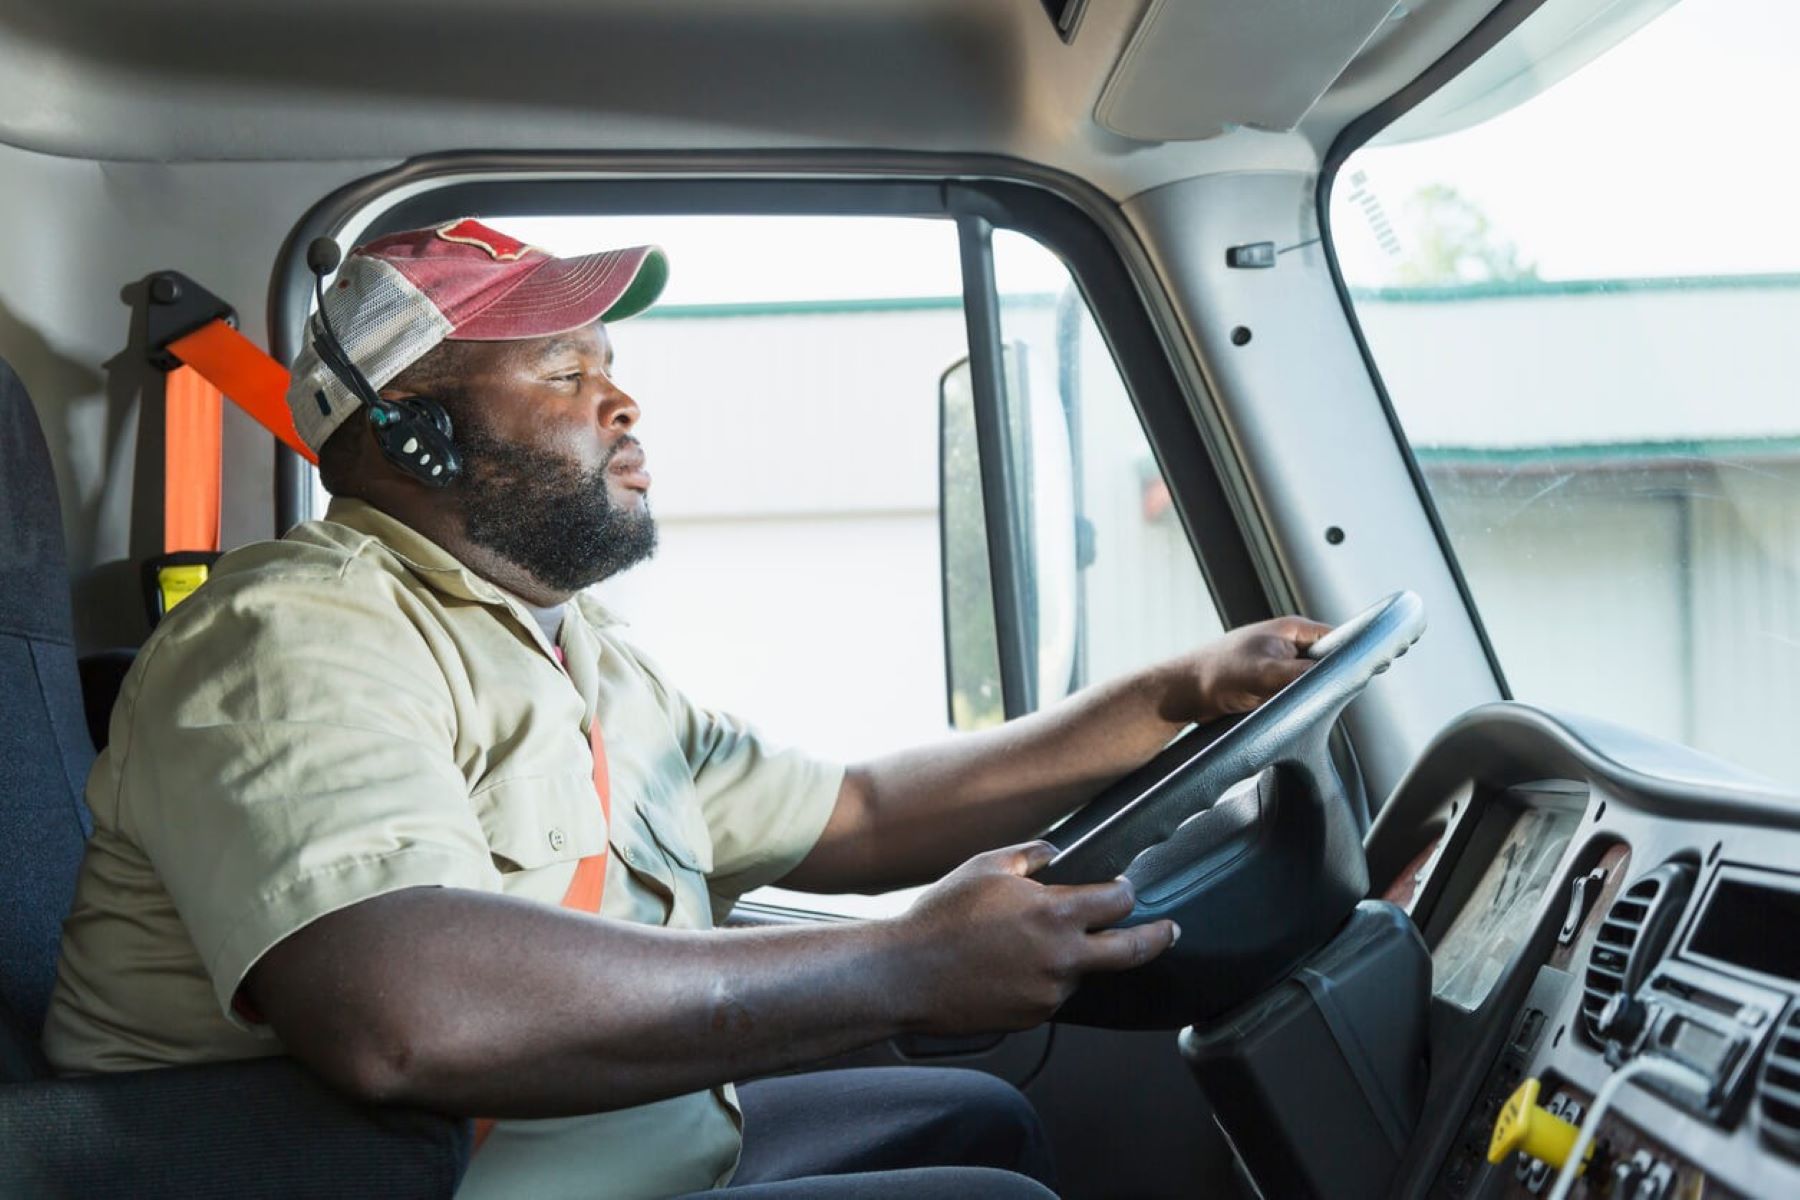 Top Headsets For Truck Drivers: Comfort & Clarity On The Road